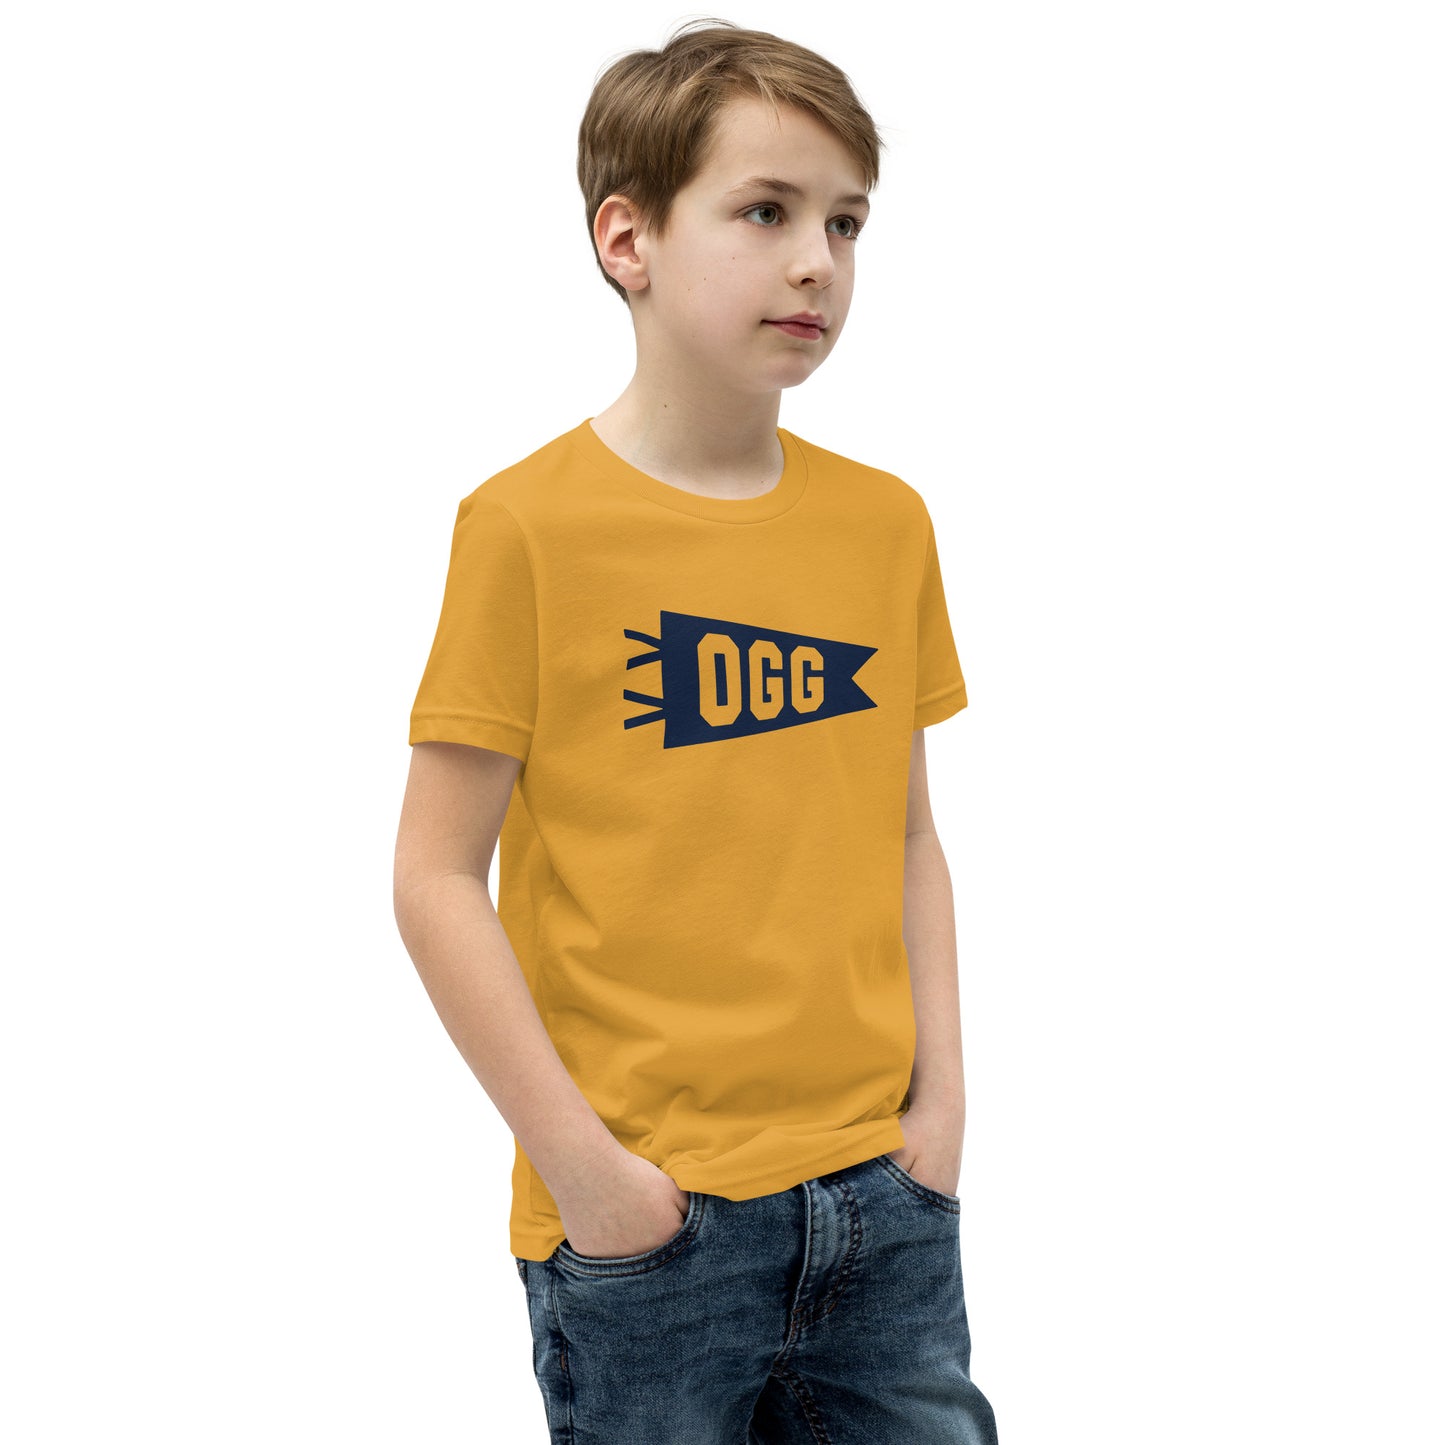 Kid's Airport Code Tee - Navy Blue Graphic • OGG Maui • YHM Designs - Image 07